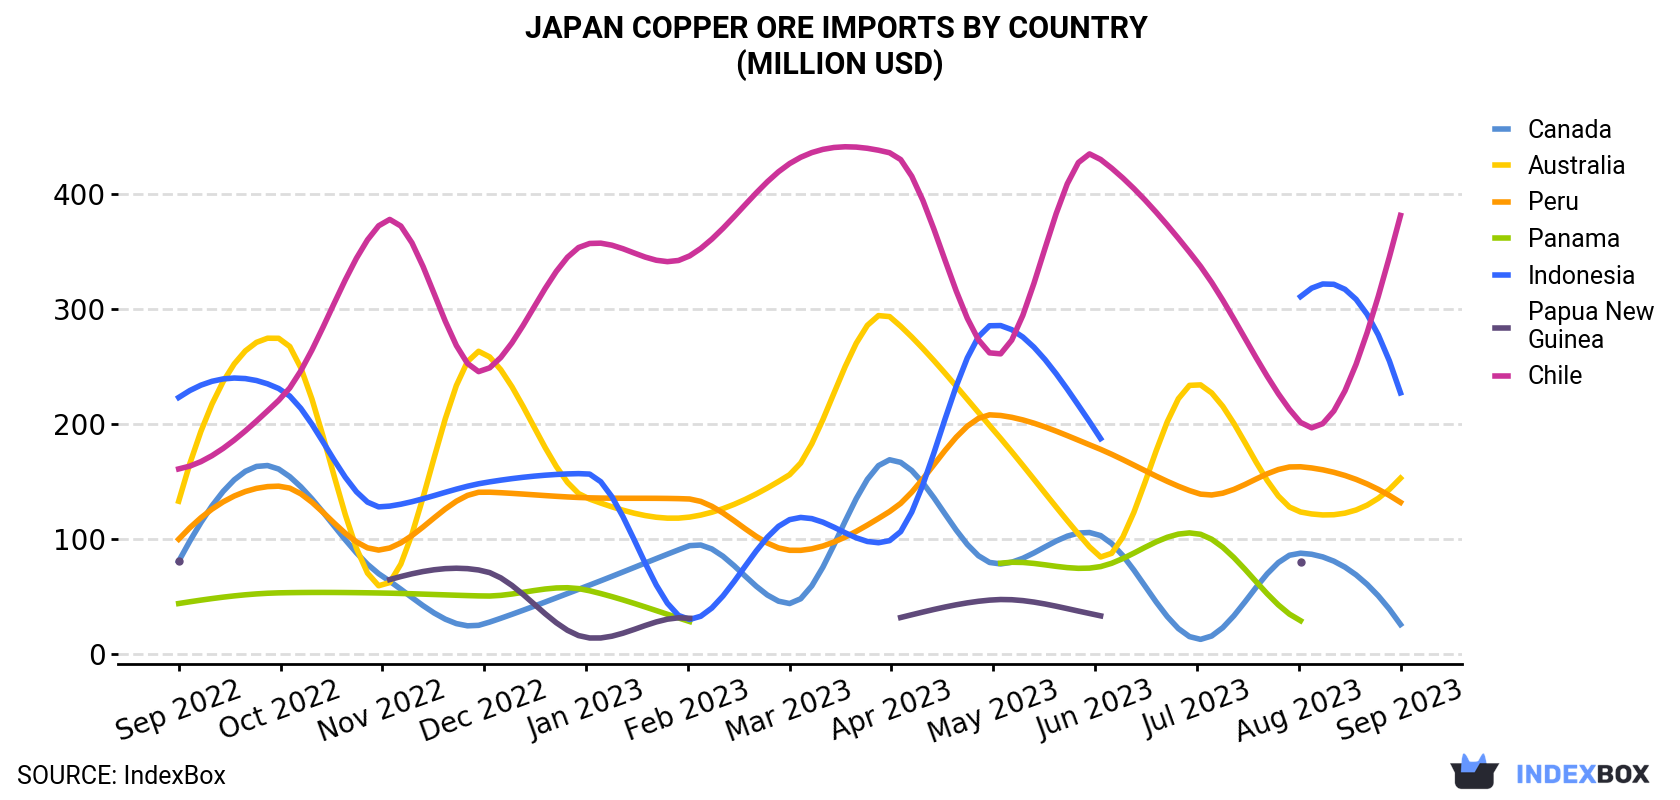 Japan Copper Ore Imports By Country (Million USD)